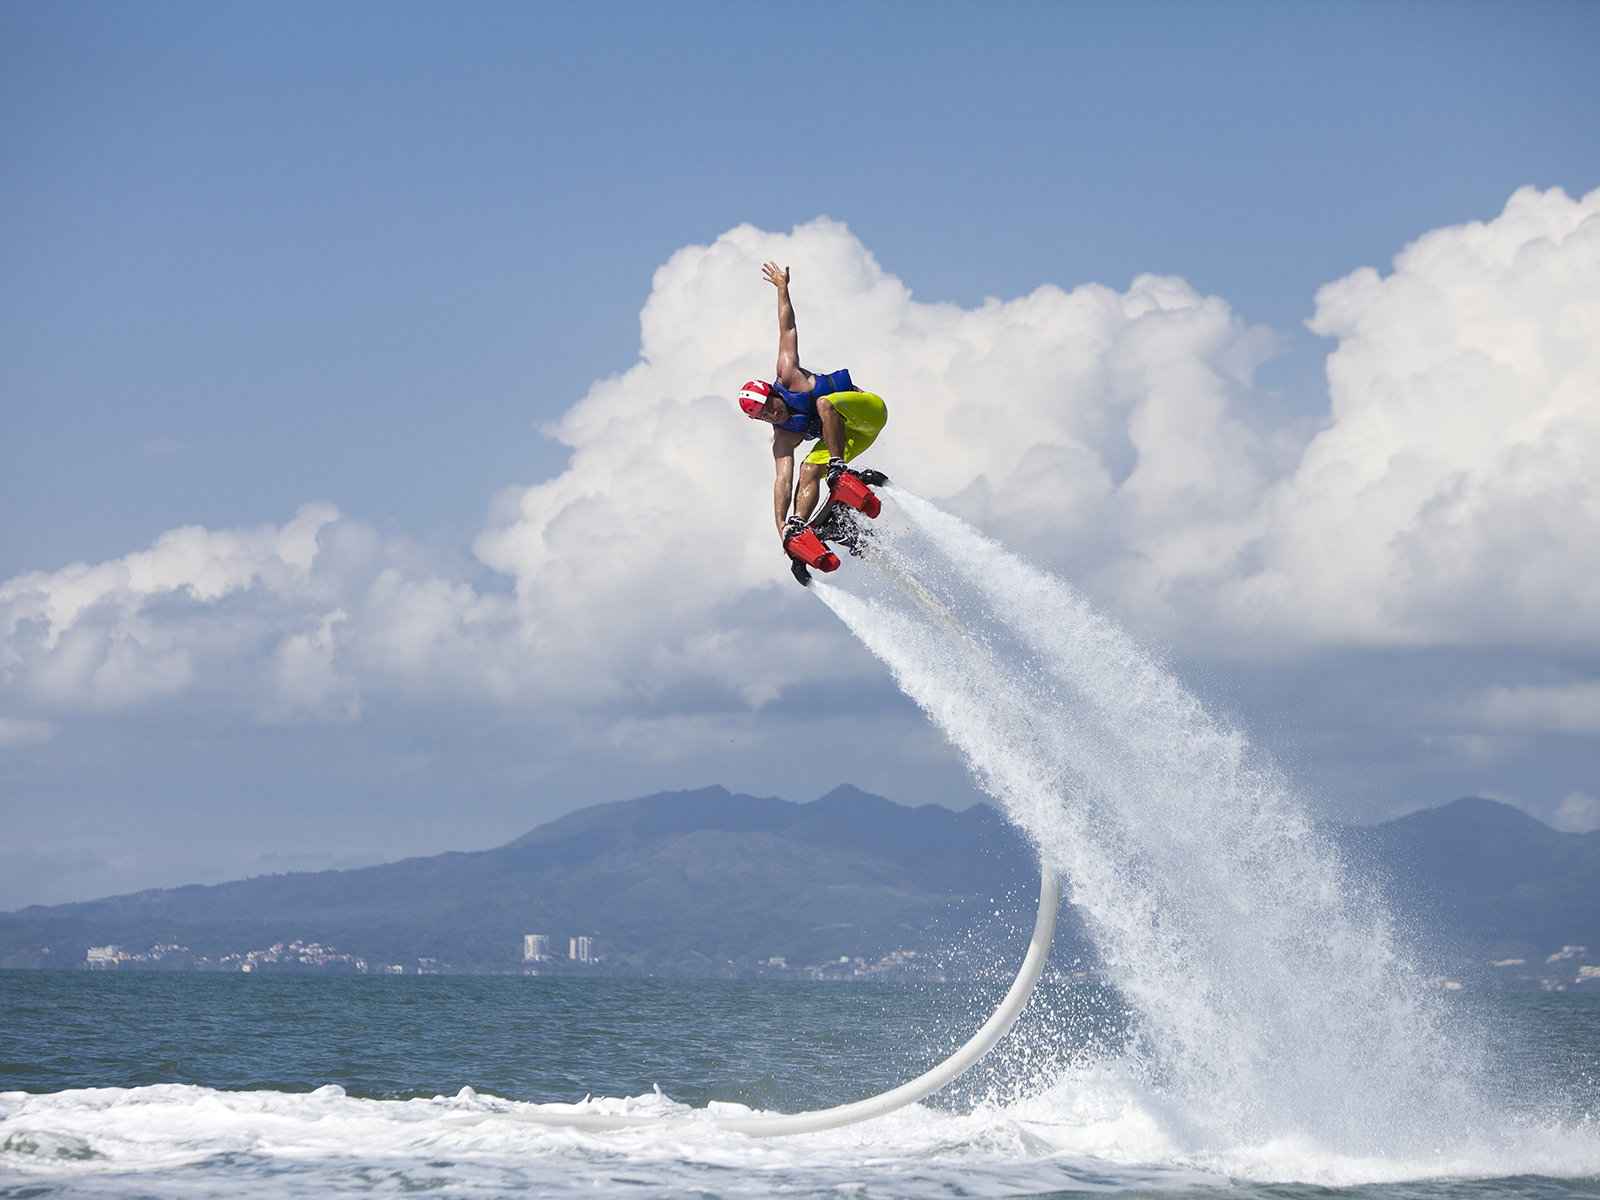 A man is propelled high above the sea by two large water jets